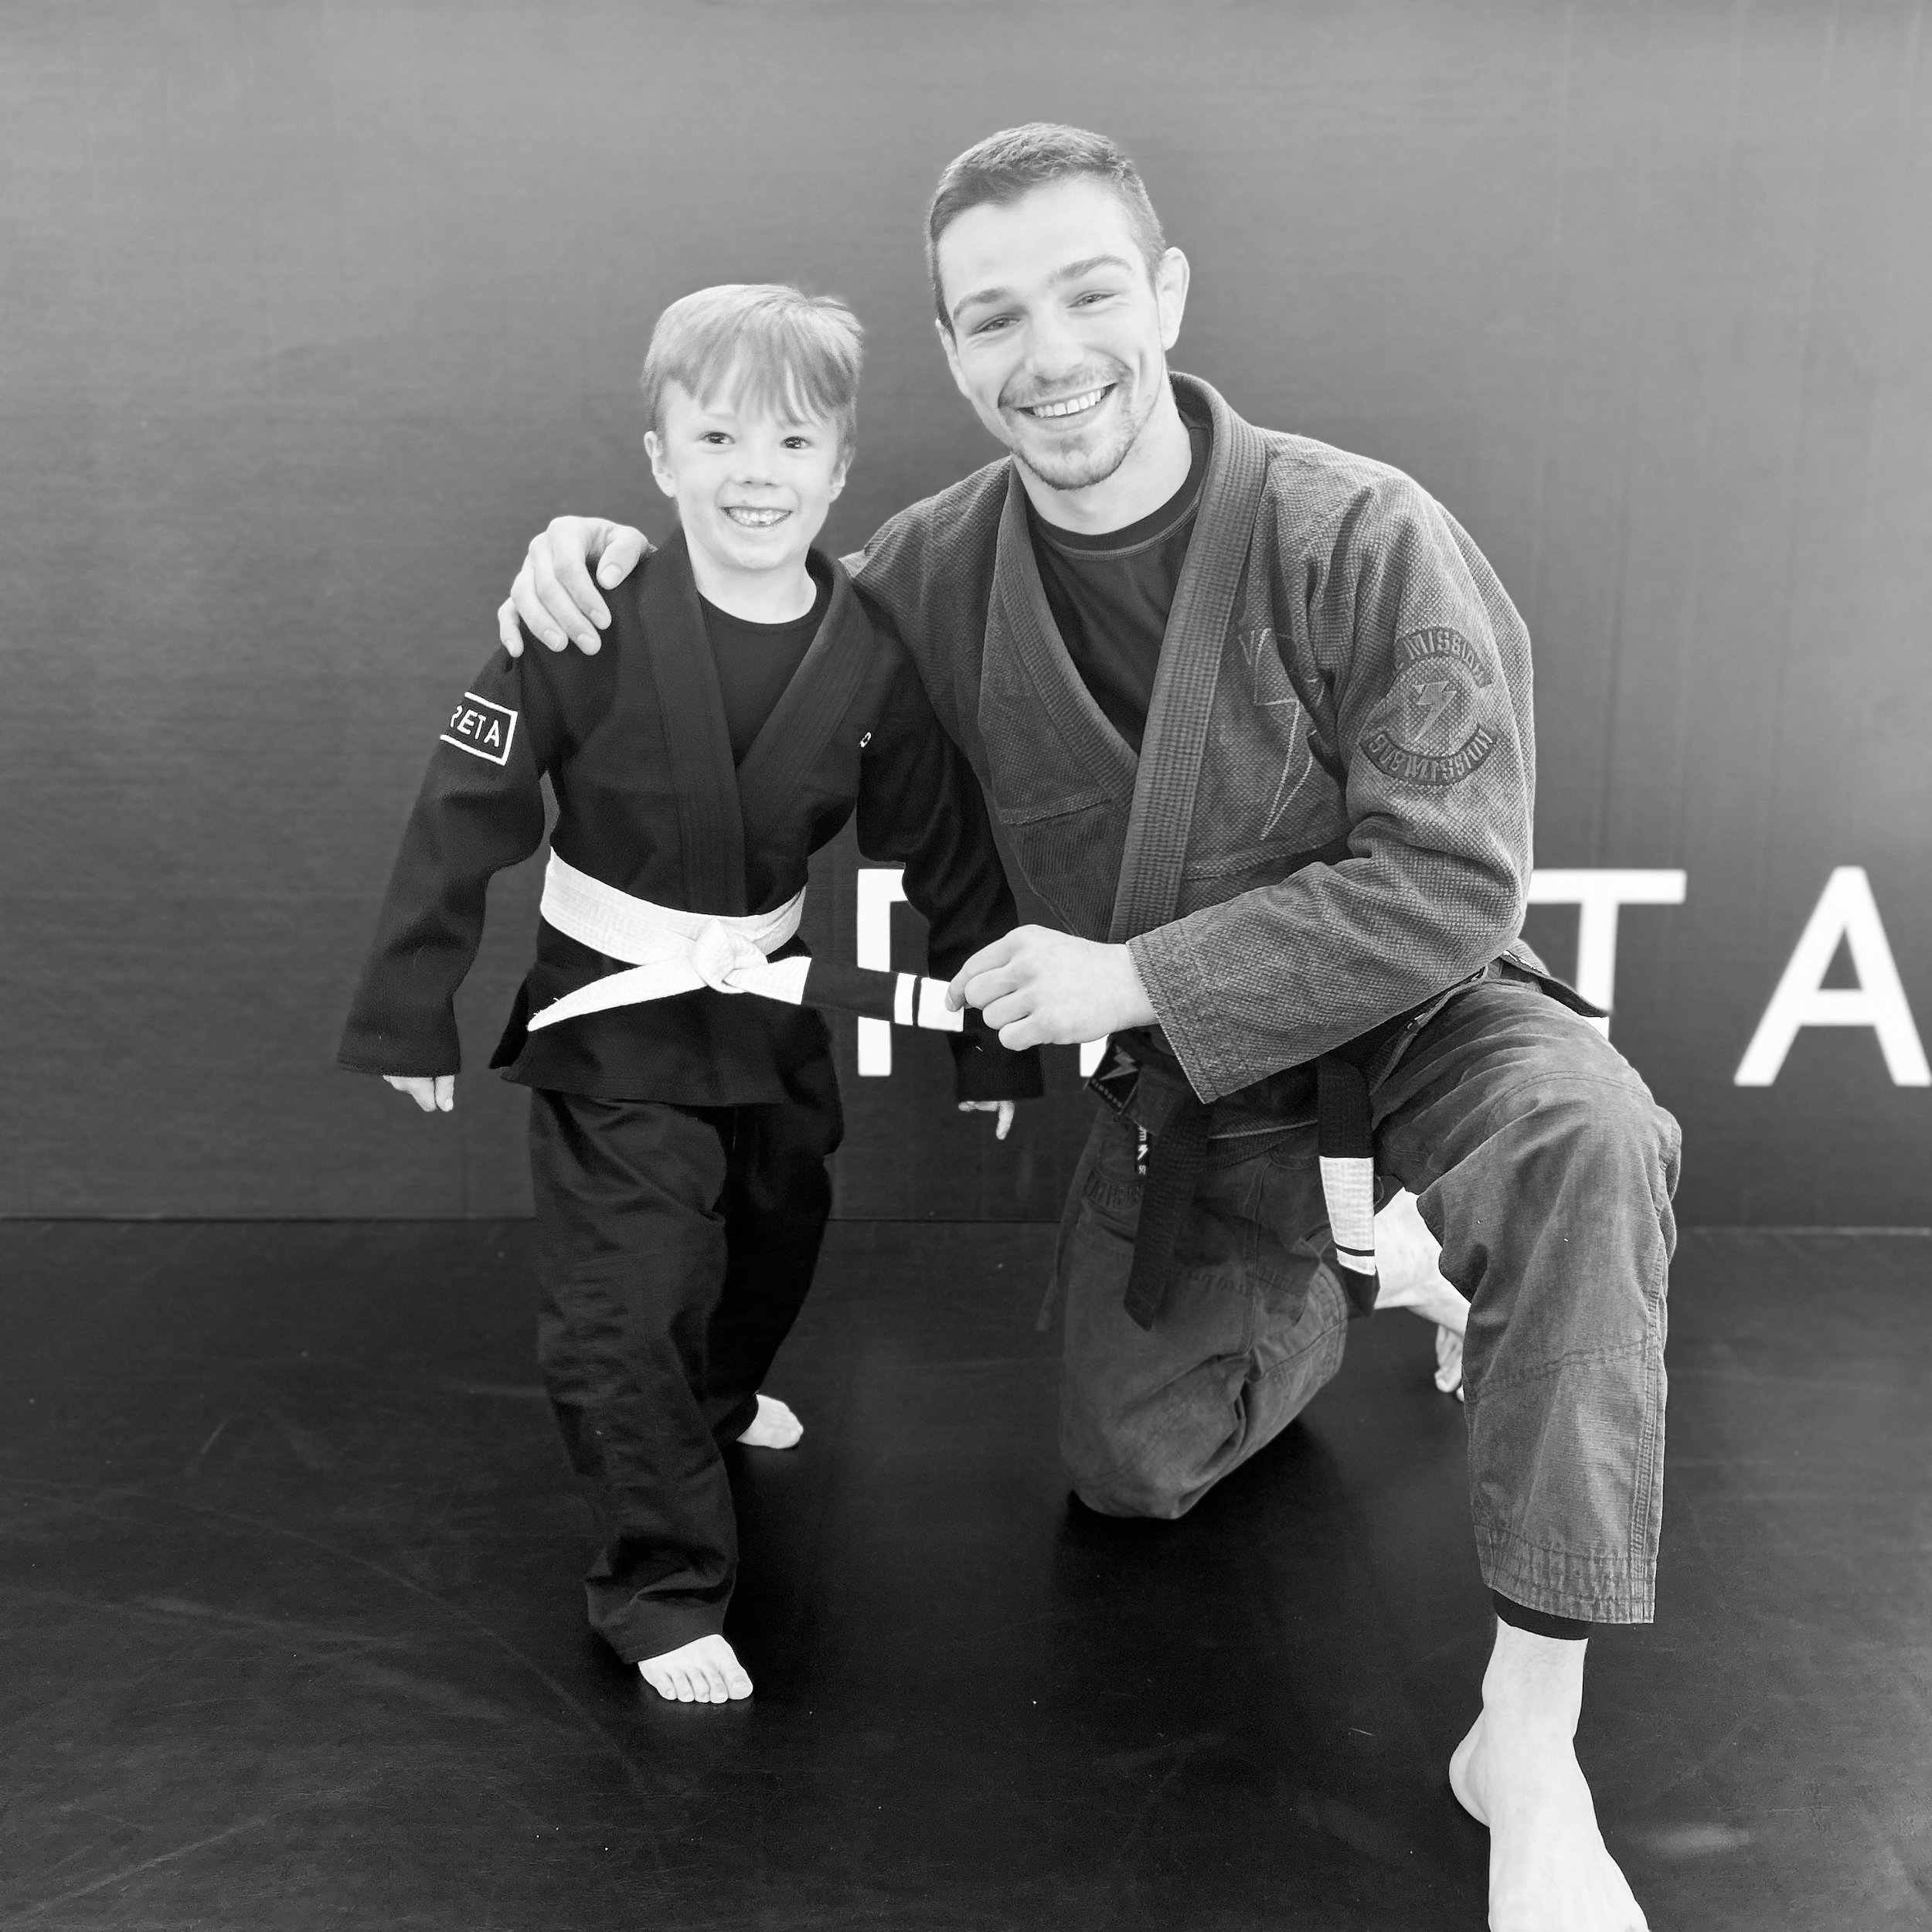 👏🏼Congratulations Sam on earning his very first stripe!

🥋This young man has been working towards this stripe each class with both focus and enthusiasm. 

💪🏼It&rsquo;s always good to see the growth from day 1 to stripe 1. 

🌱The growth in confi